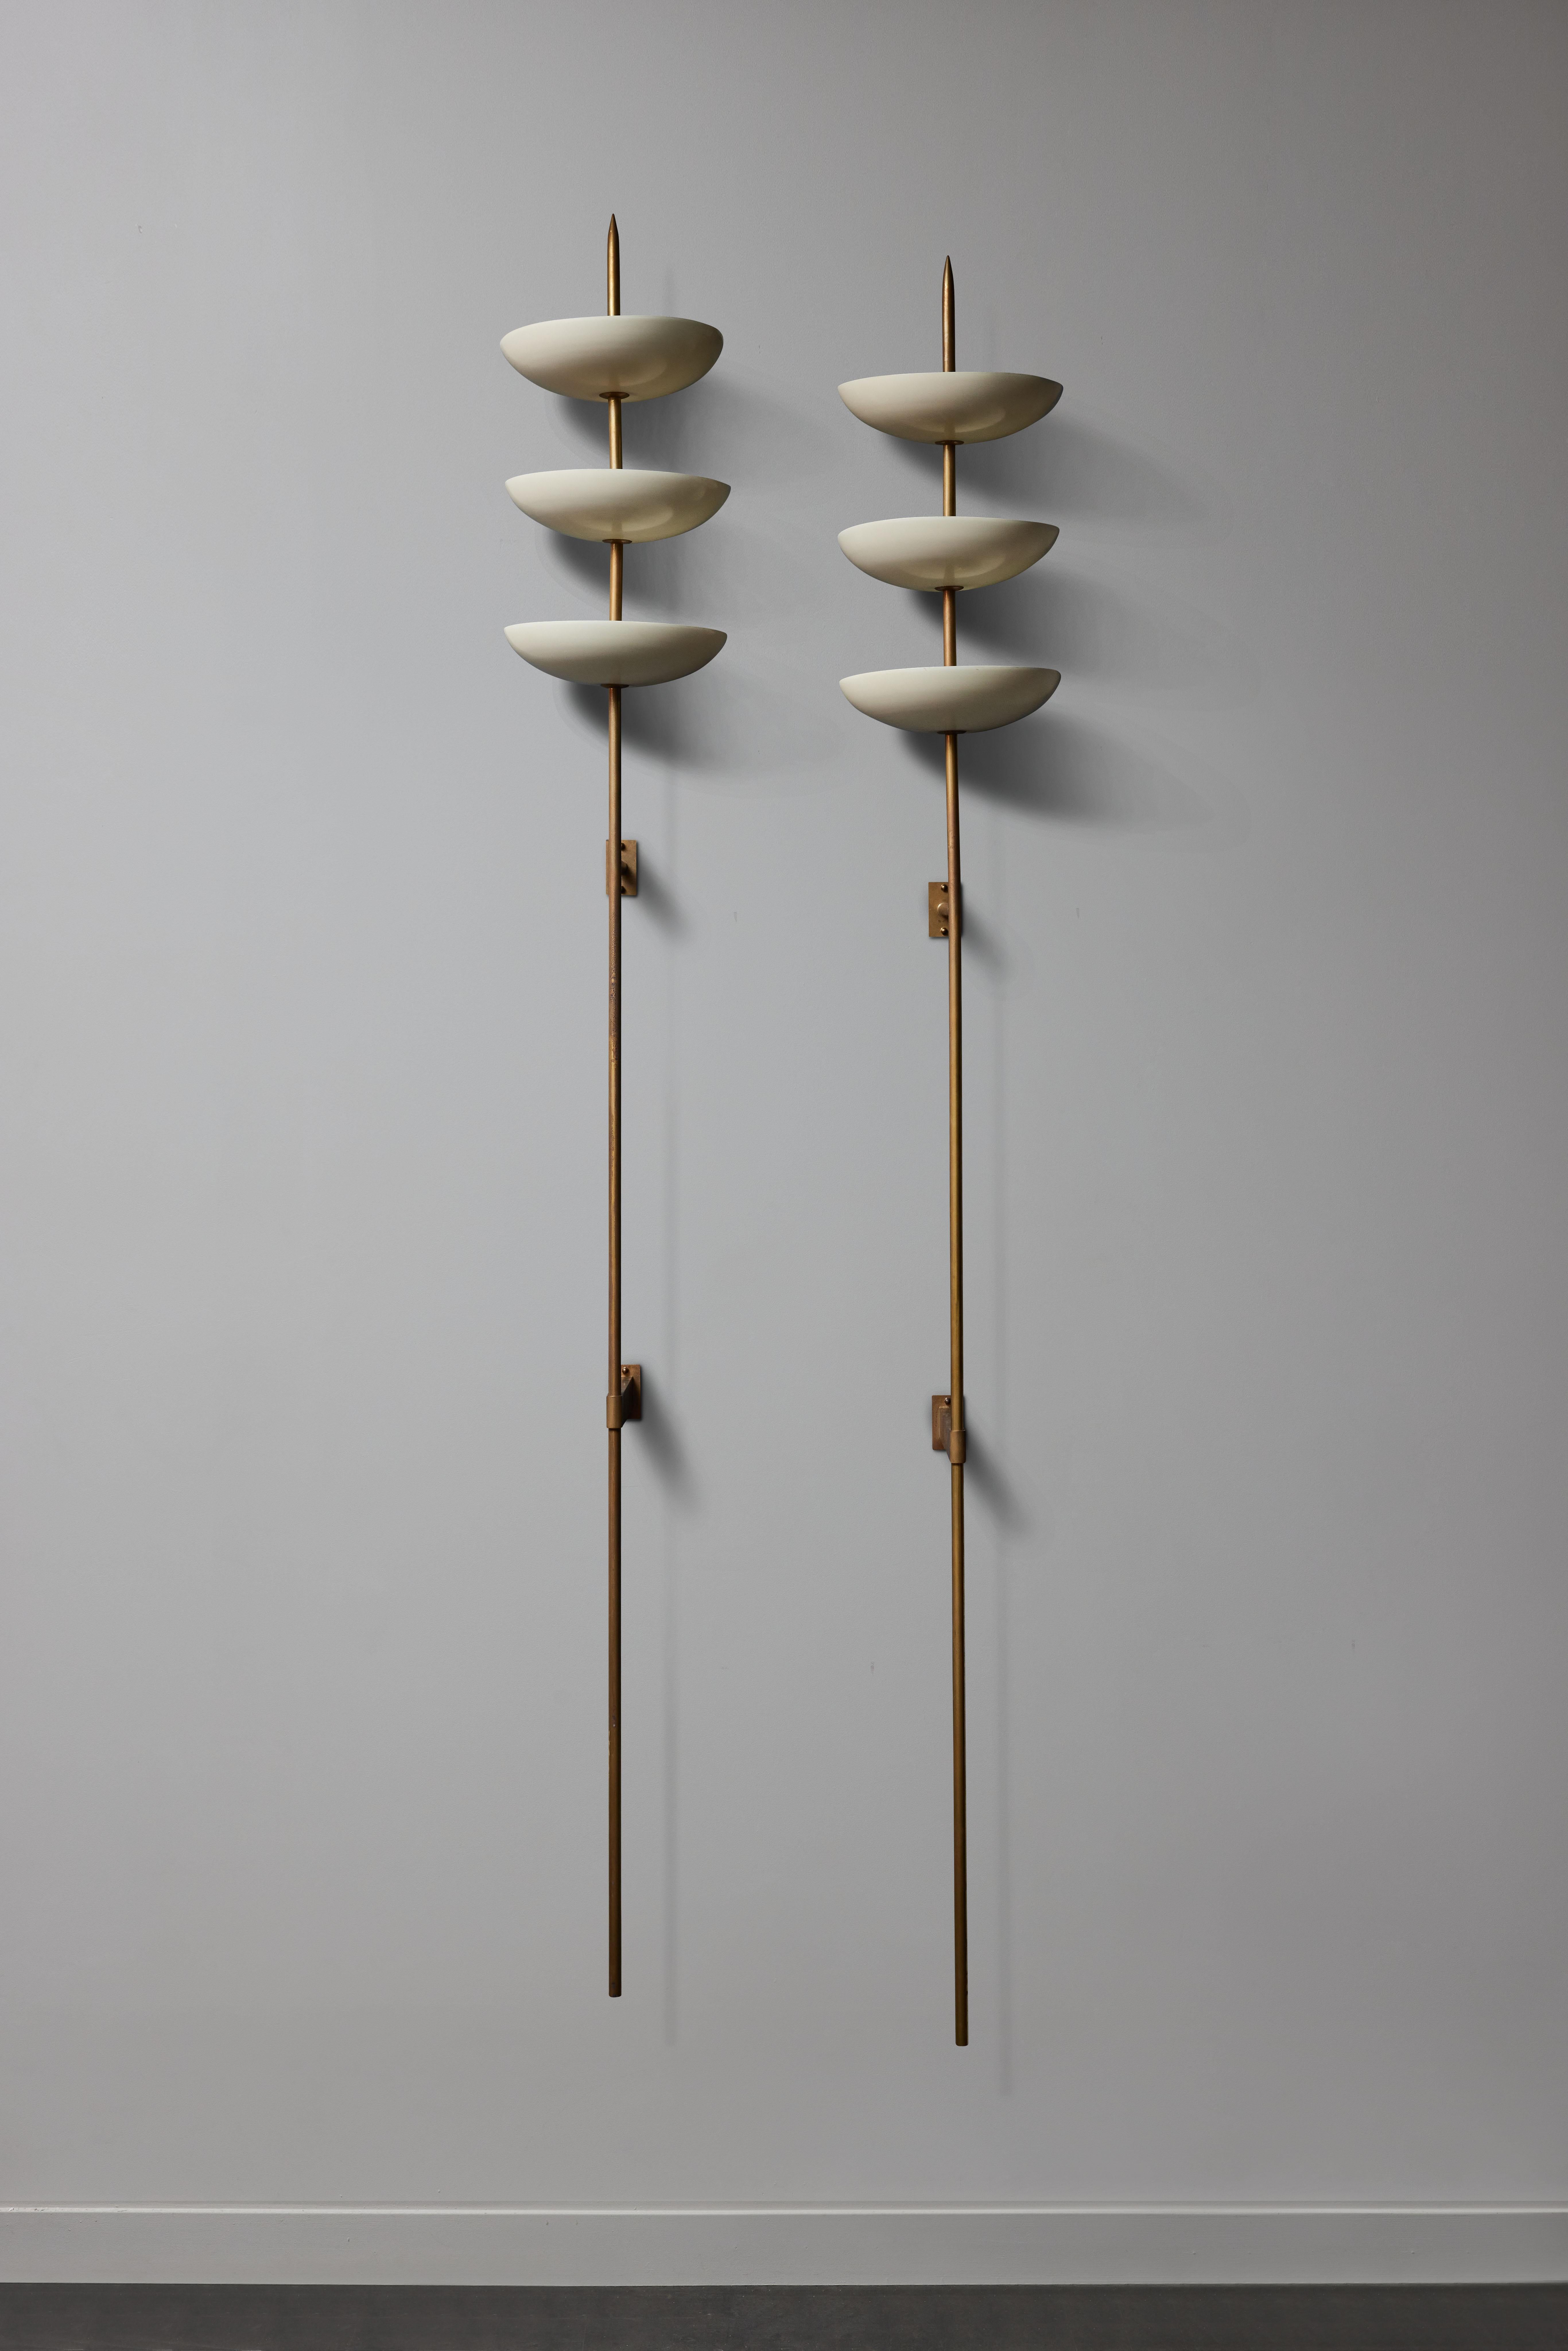 Pair of tall wall sconces made of two mounting brackets, long brass stem and three enameled metal shallow bowls each hosting two sources of light.